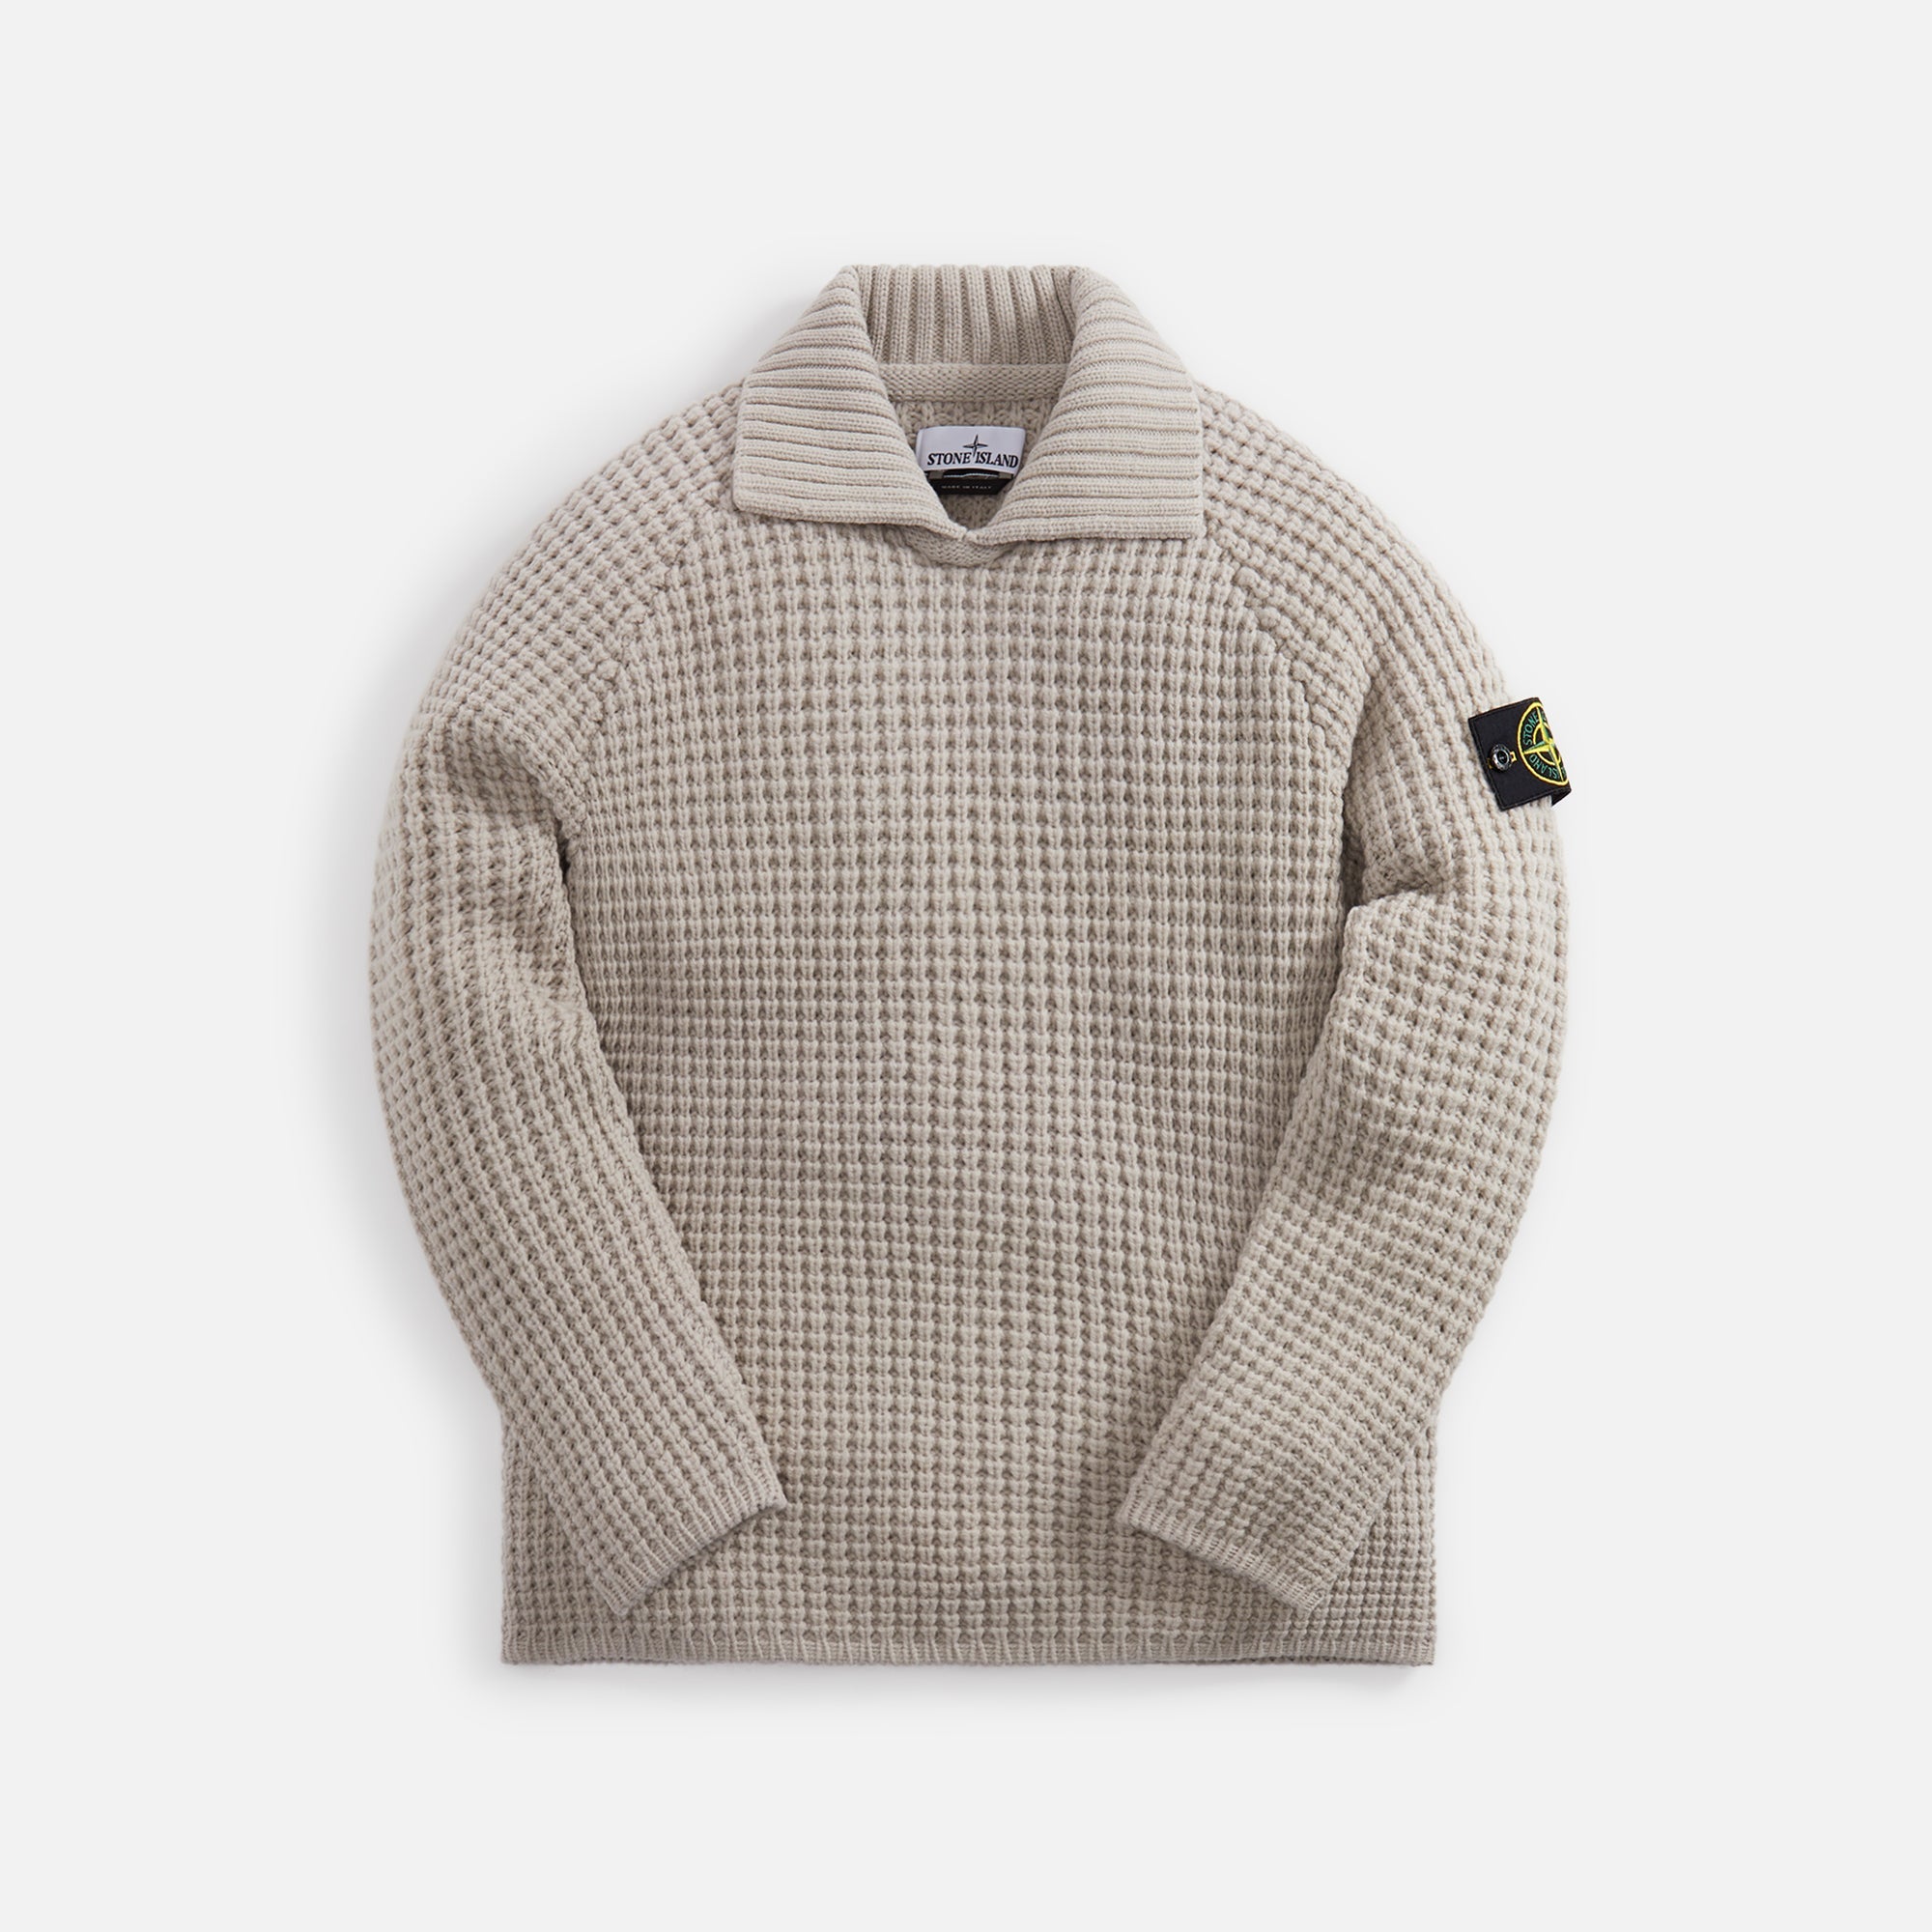 Stone Island President's Knit Pure Wool Knit Polo - Plaster – Kith 